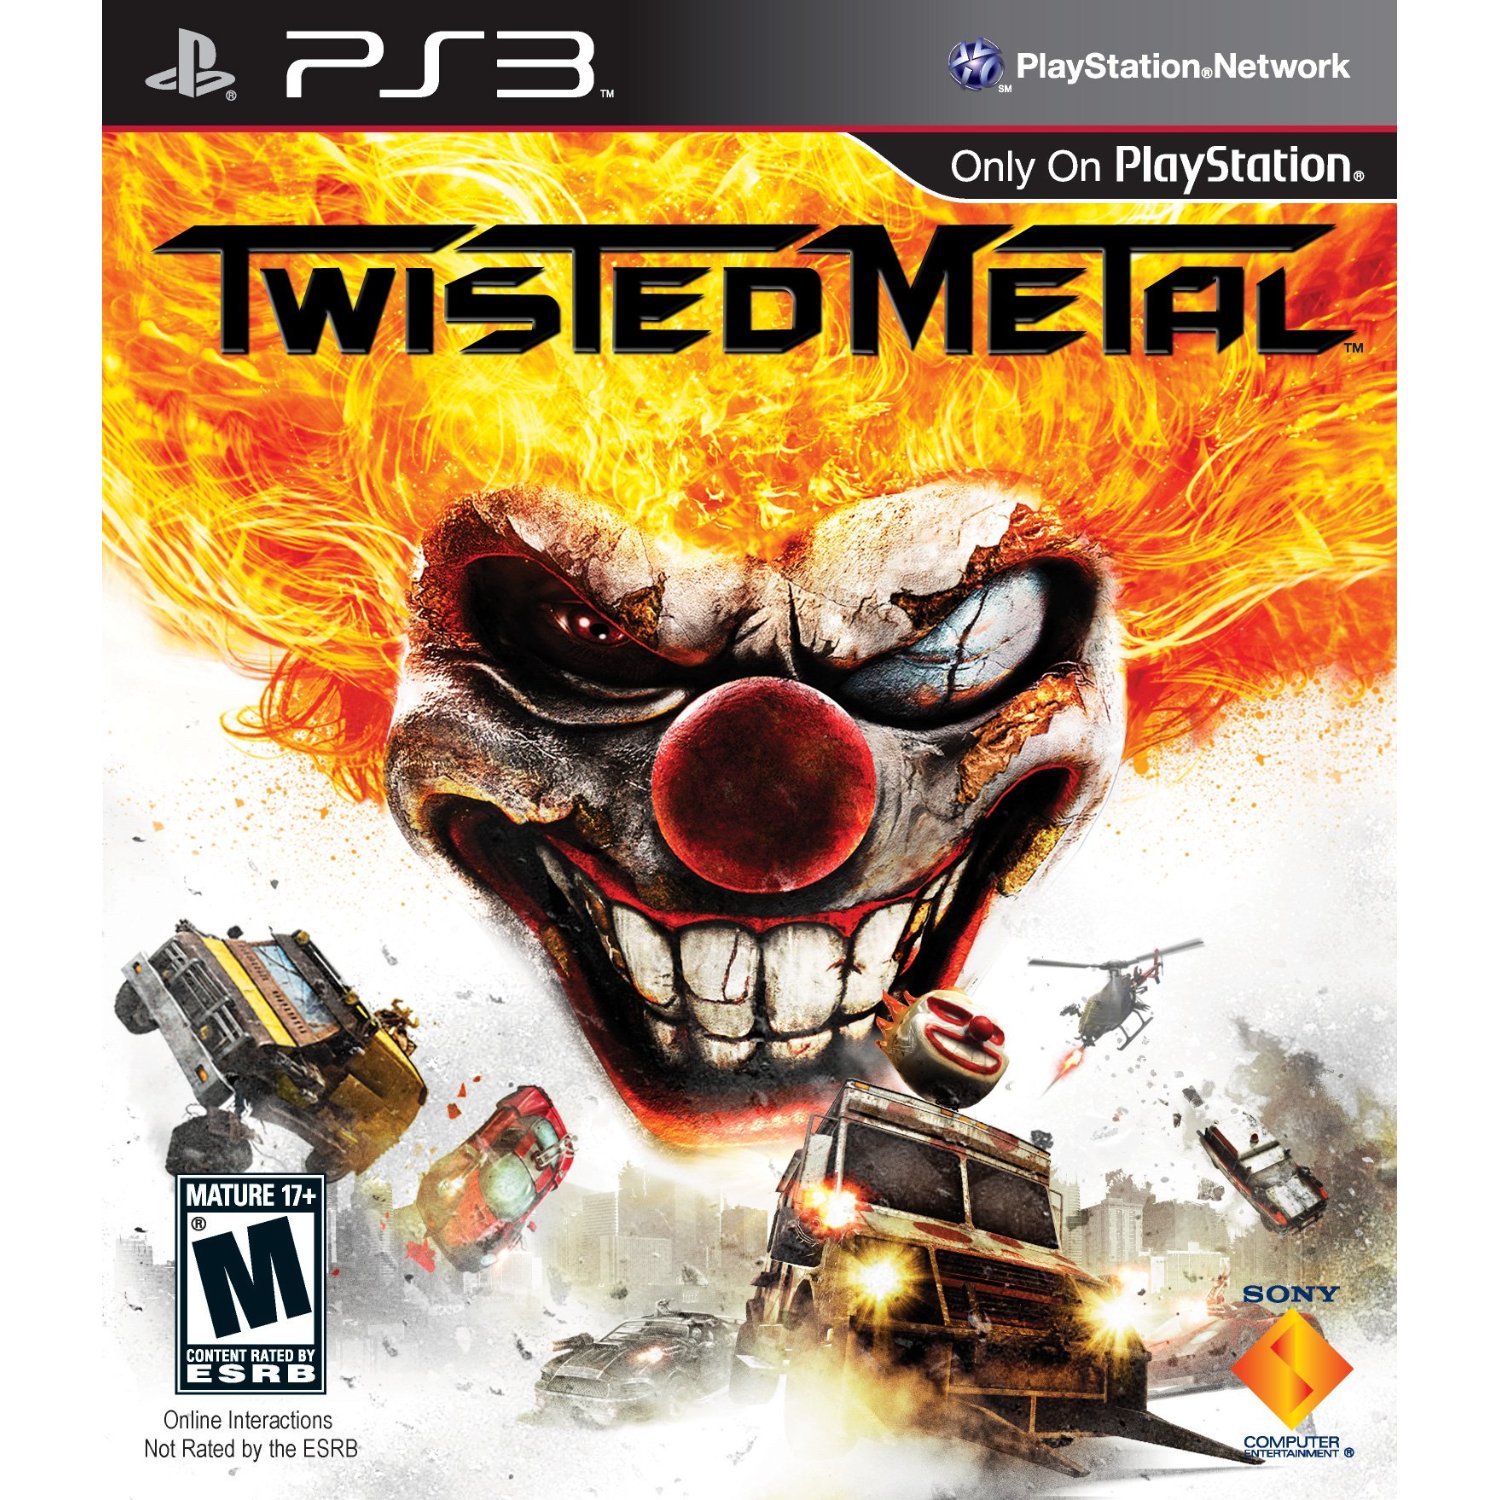 https://thetechjournal.com/wp-content/uploads/images/1204/1334349686-twisted-metal--ps3-game-review-1.jpg